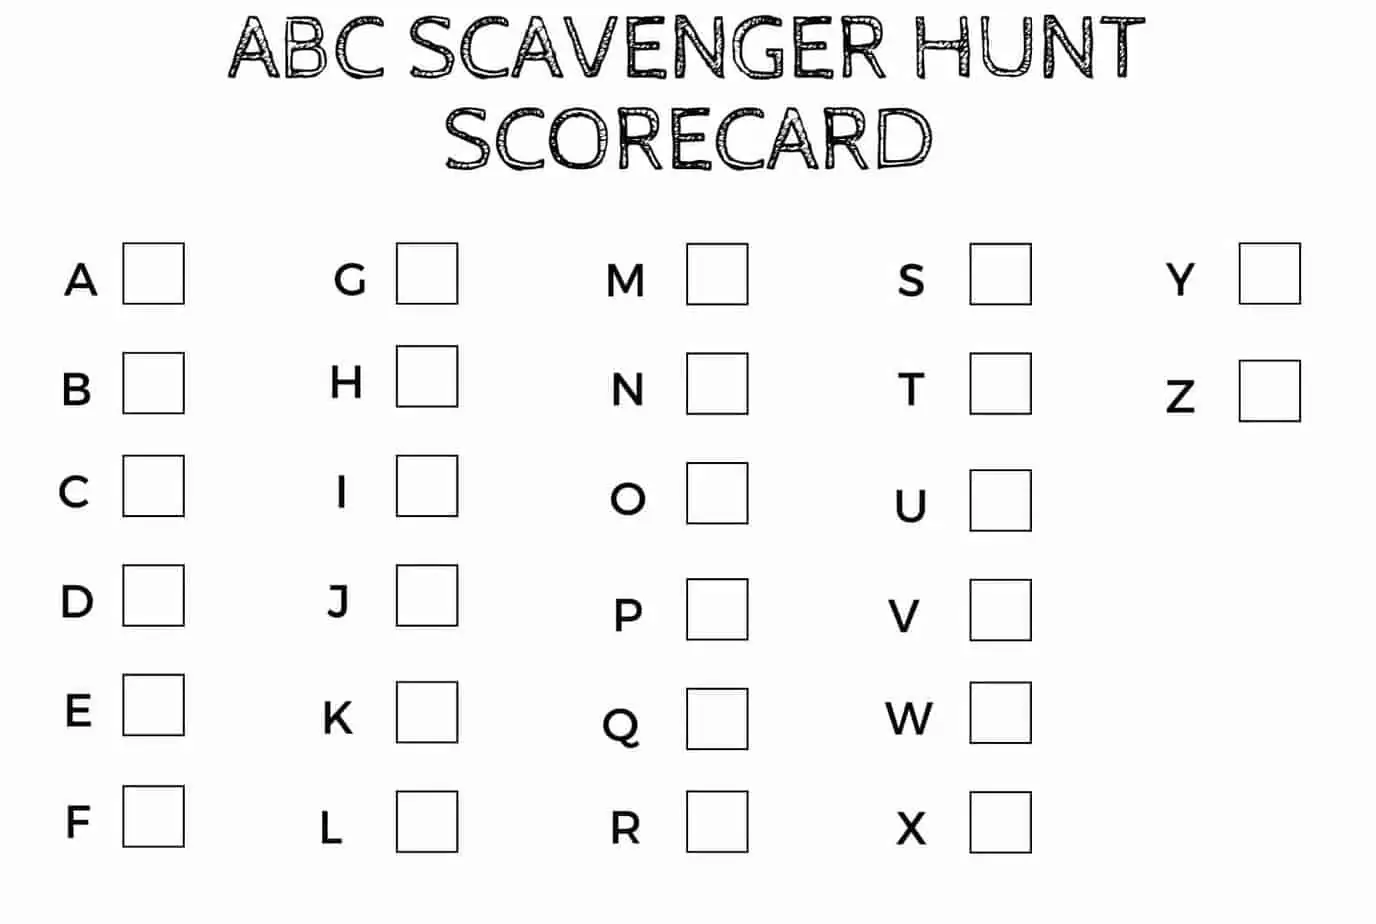 Is your preschooler ready to master their ABCs? The ABC letter recognition scavenger hunt makes letter association fun - the best way for littles to learn.